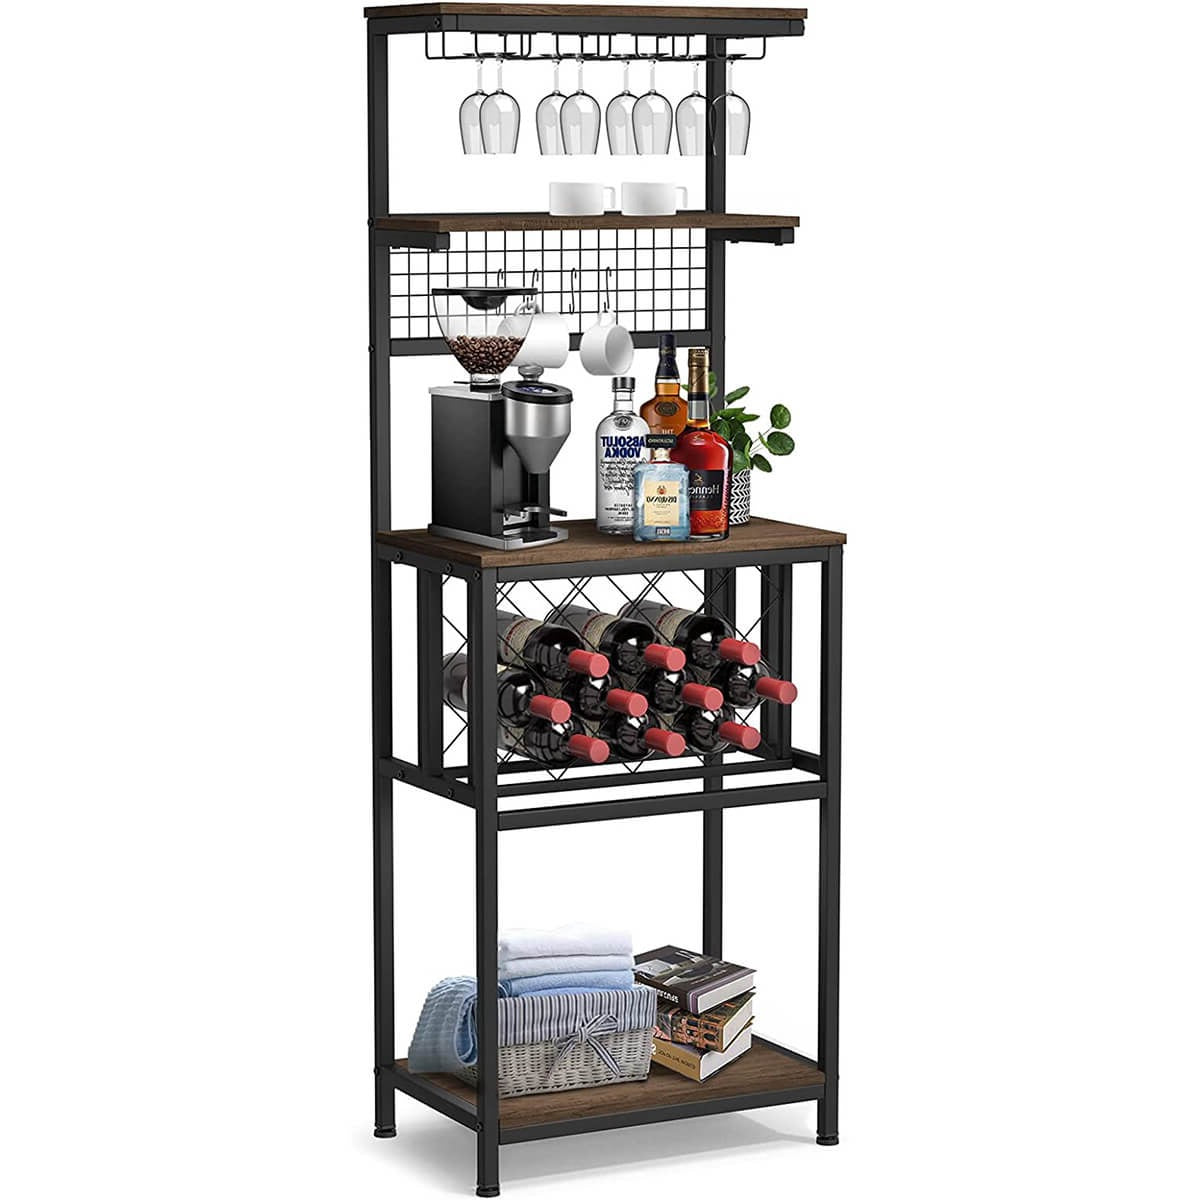 Elegant Wine Rack with Shelf for Storing and Displaying Bottles